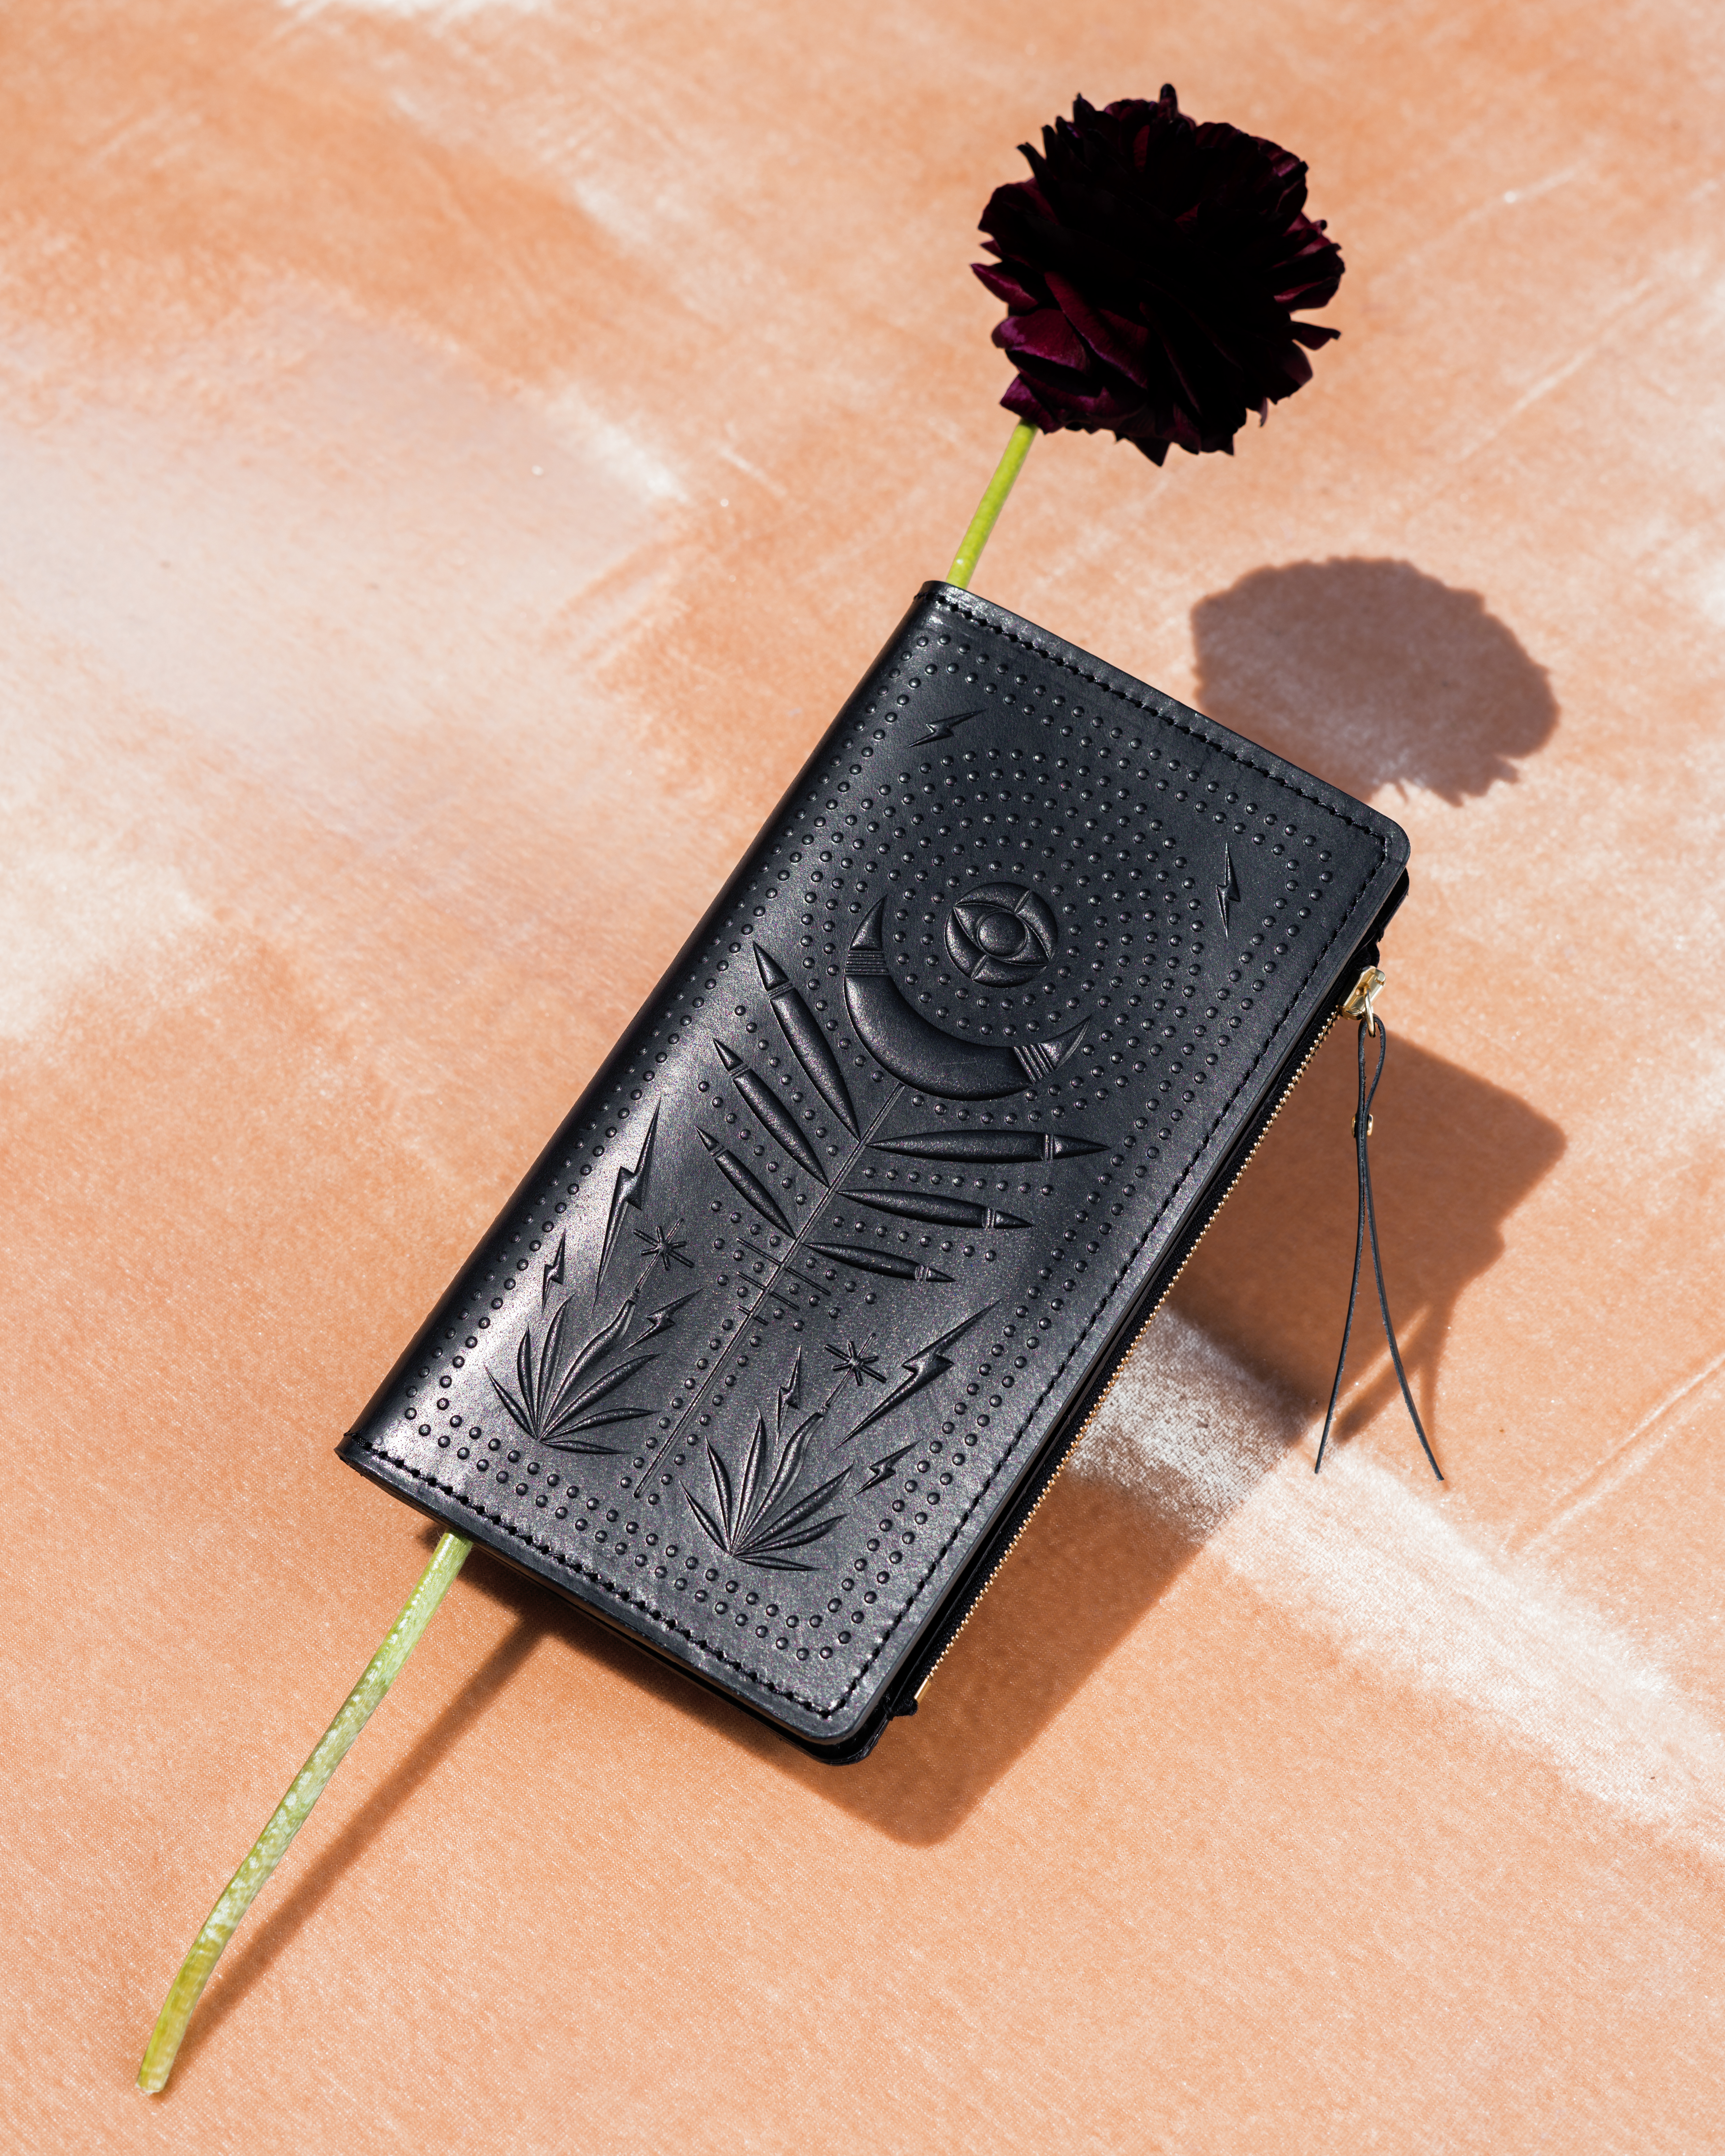 Black zip wallet with mystical design and a flower tucked inside the wallet. It’s photographed under harsh light, which casts a shadow on the pink velvet backdrop the wallet is photographed on. 